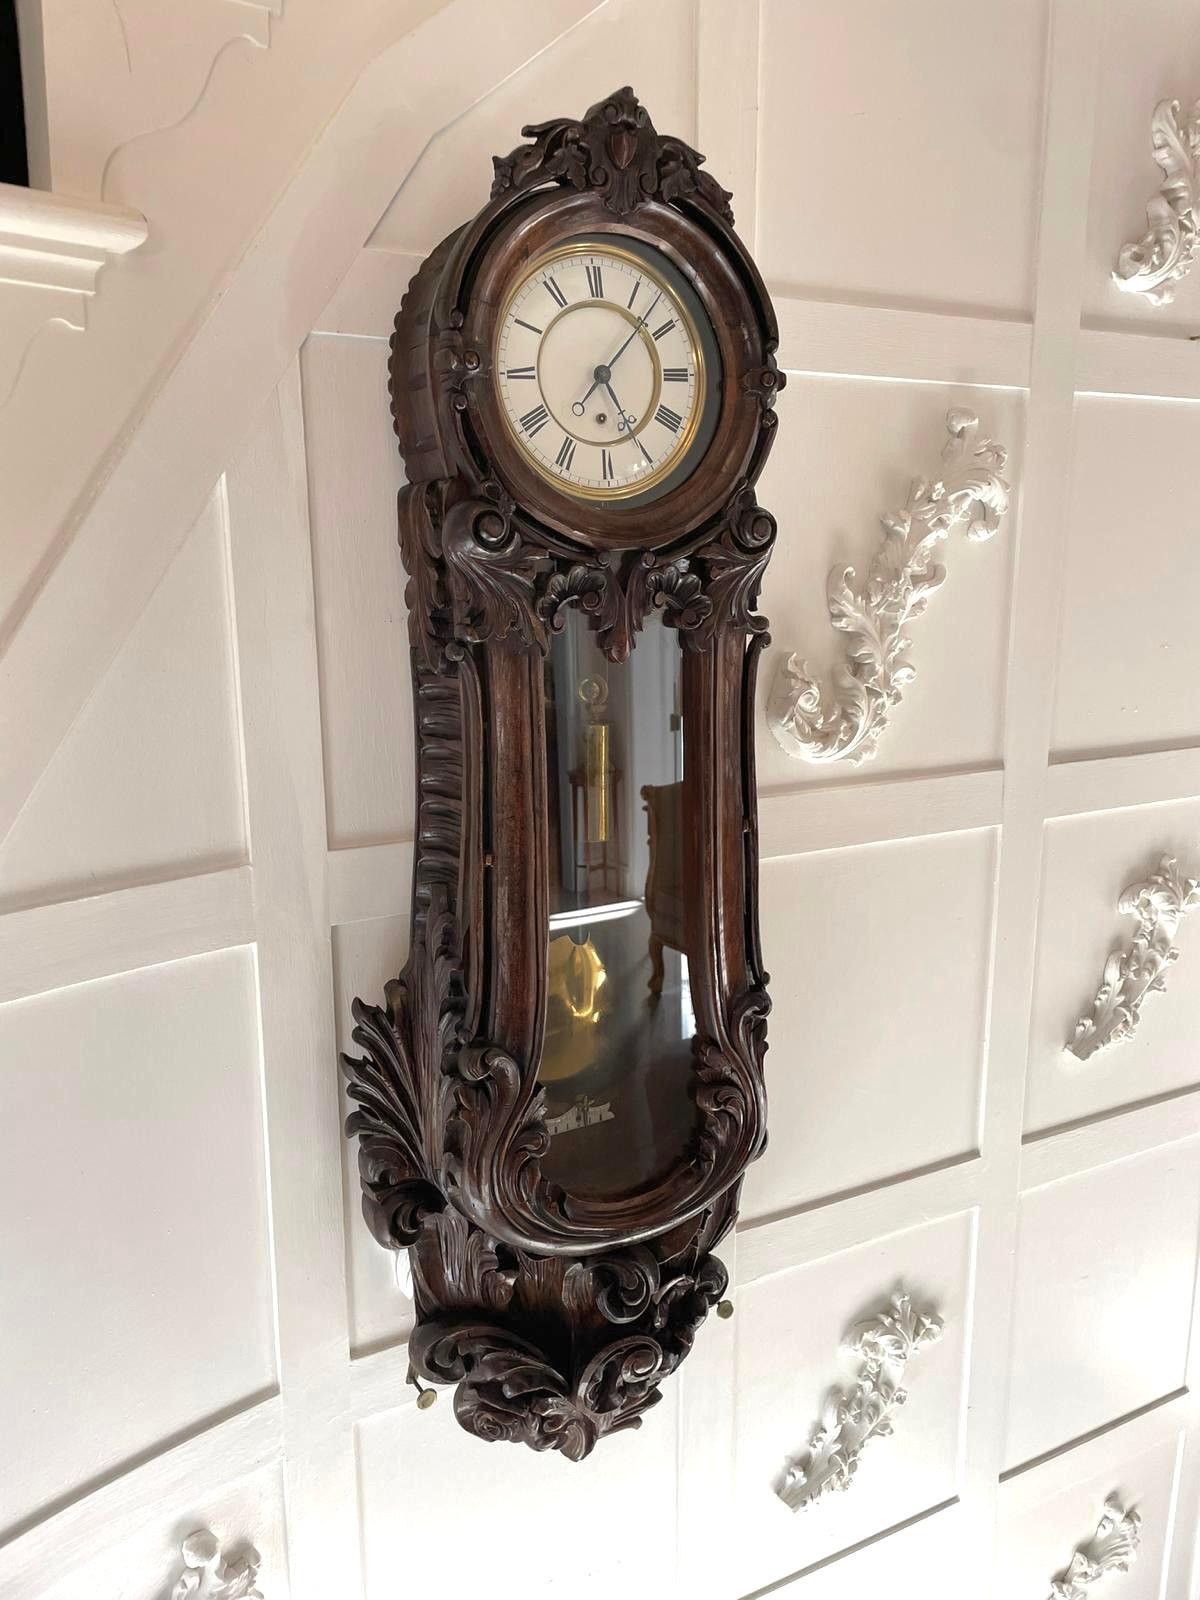 Outstanding quality antique Victorian carved oak Vienna wall clock boasting a fabulous quality carved oak case carved with scrolls, leaves and flowers, single glazed door opening to reveal a circular porcelain dial with original hands, 8 day